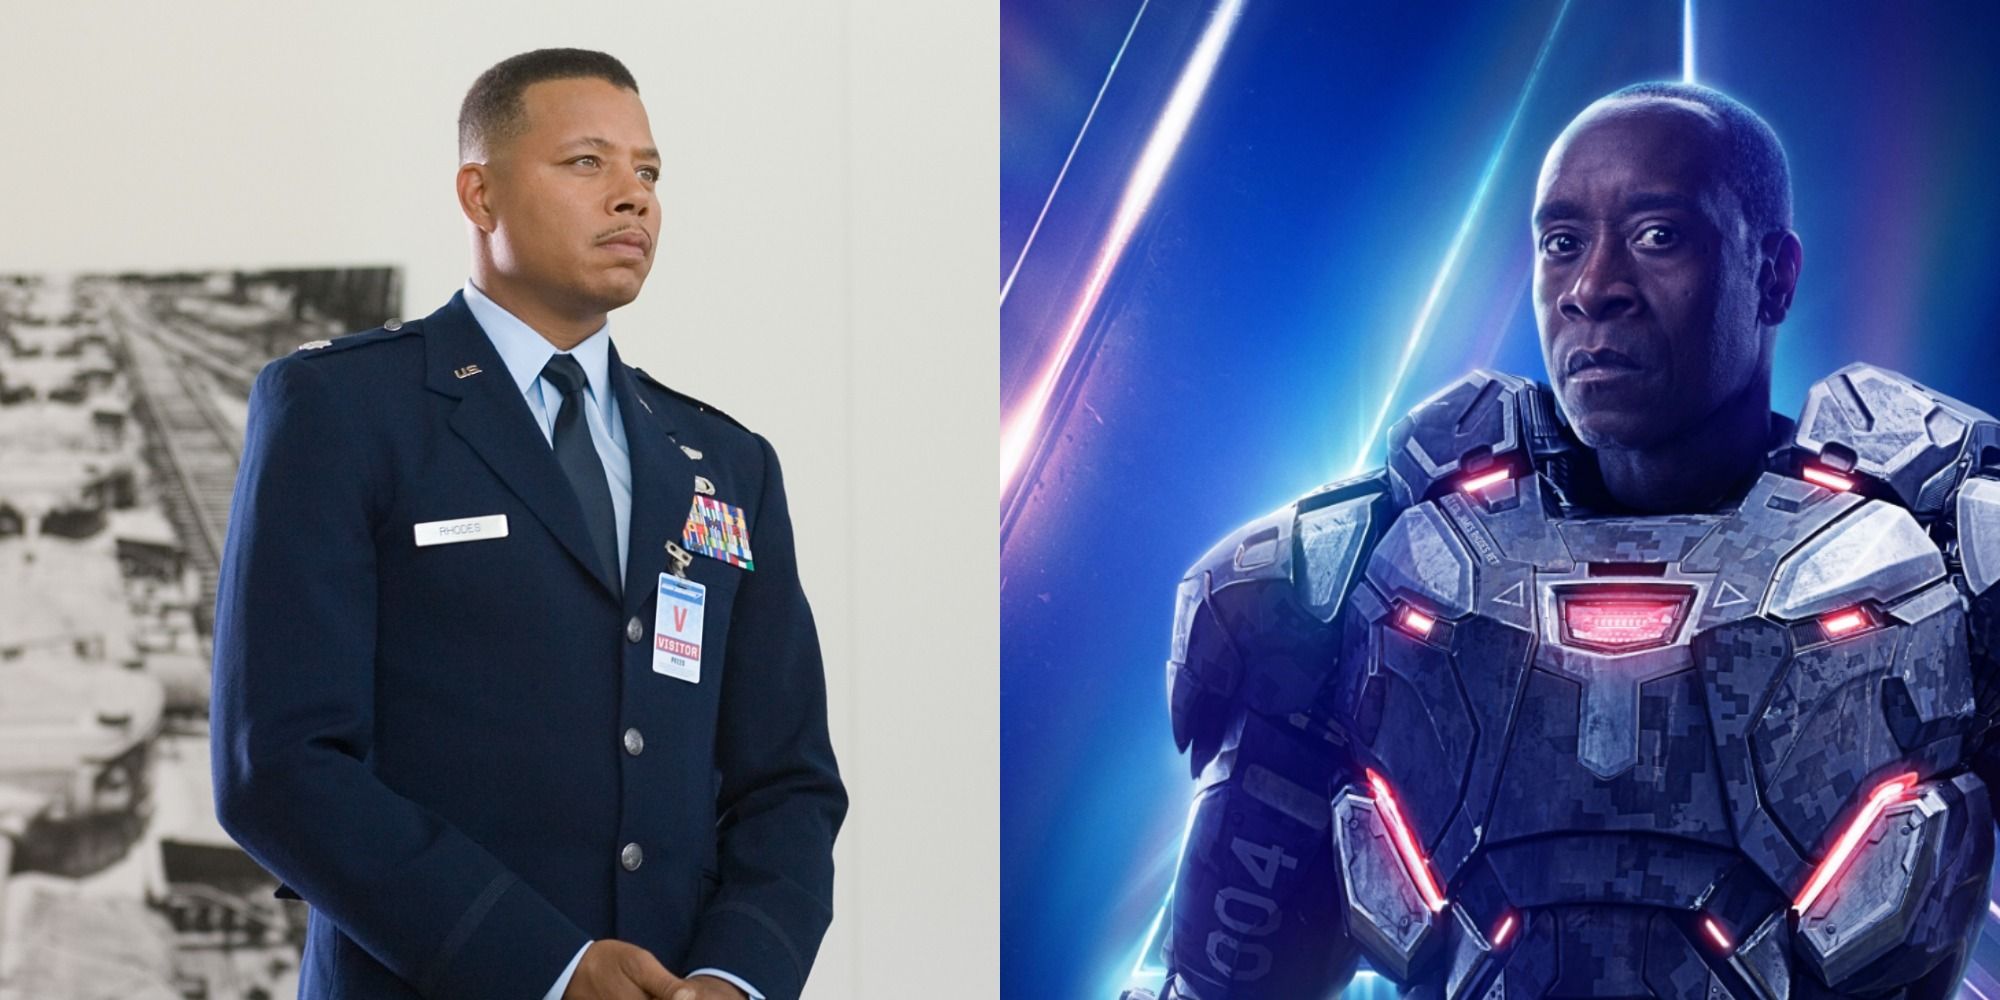 side by side images of Terrence Howard and Don Cheadle as War MachineJames Rhodes in the MCU